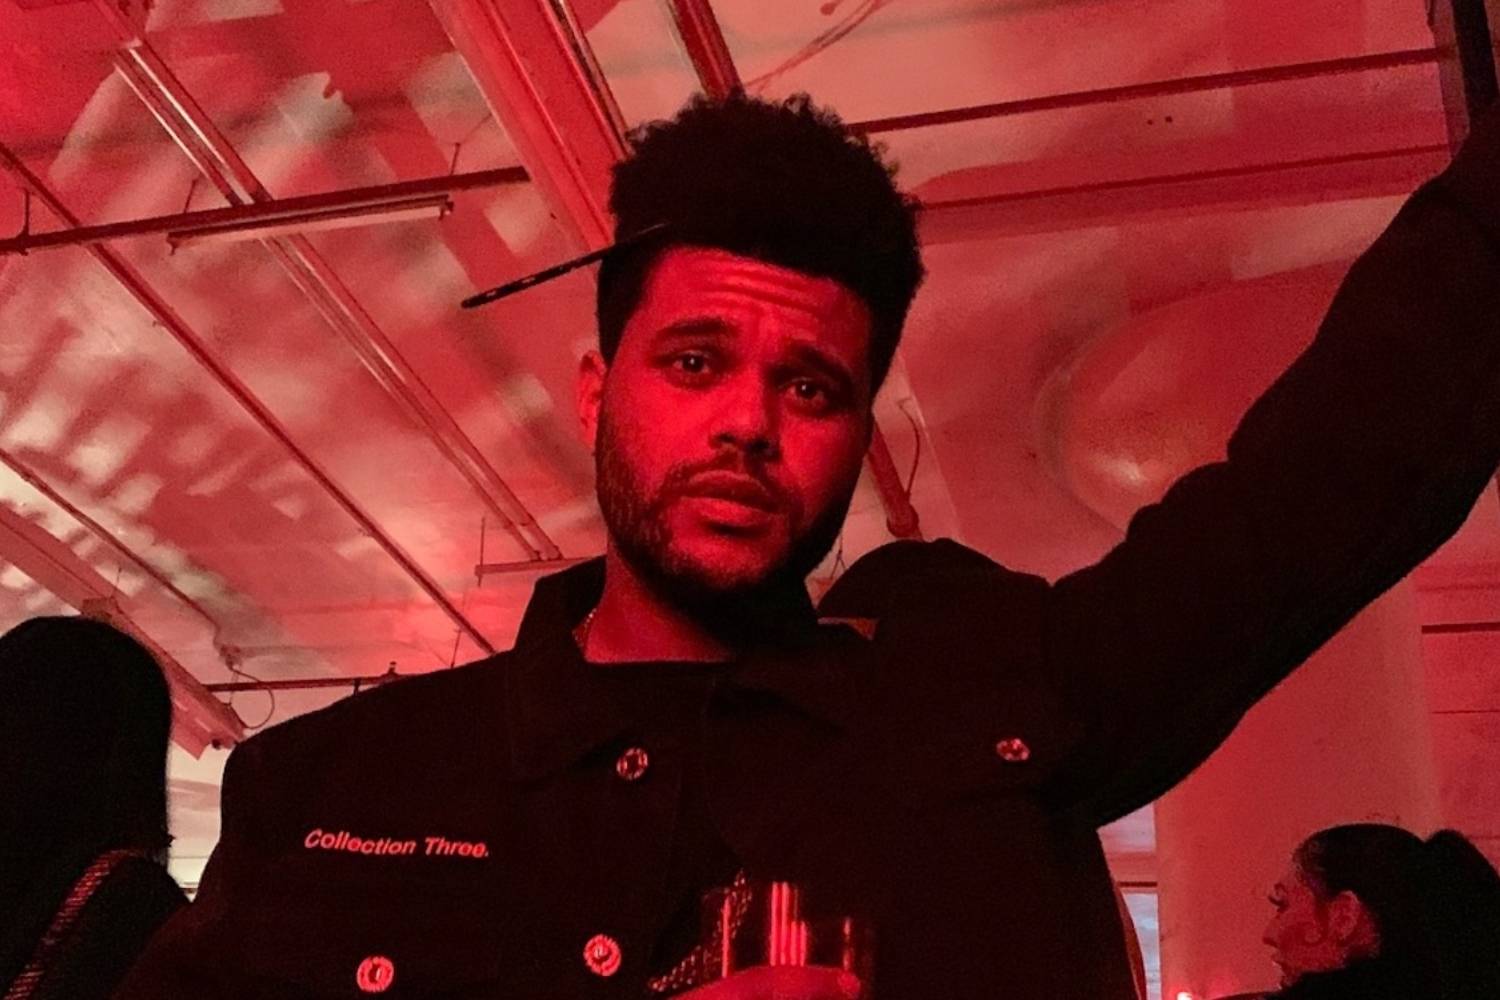 Toronto, Canada’s R&B star, The Weeknd has confirmed the imminent r...